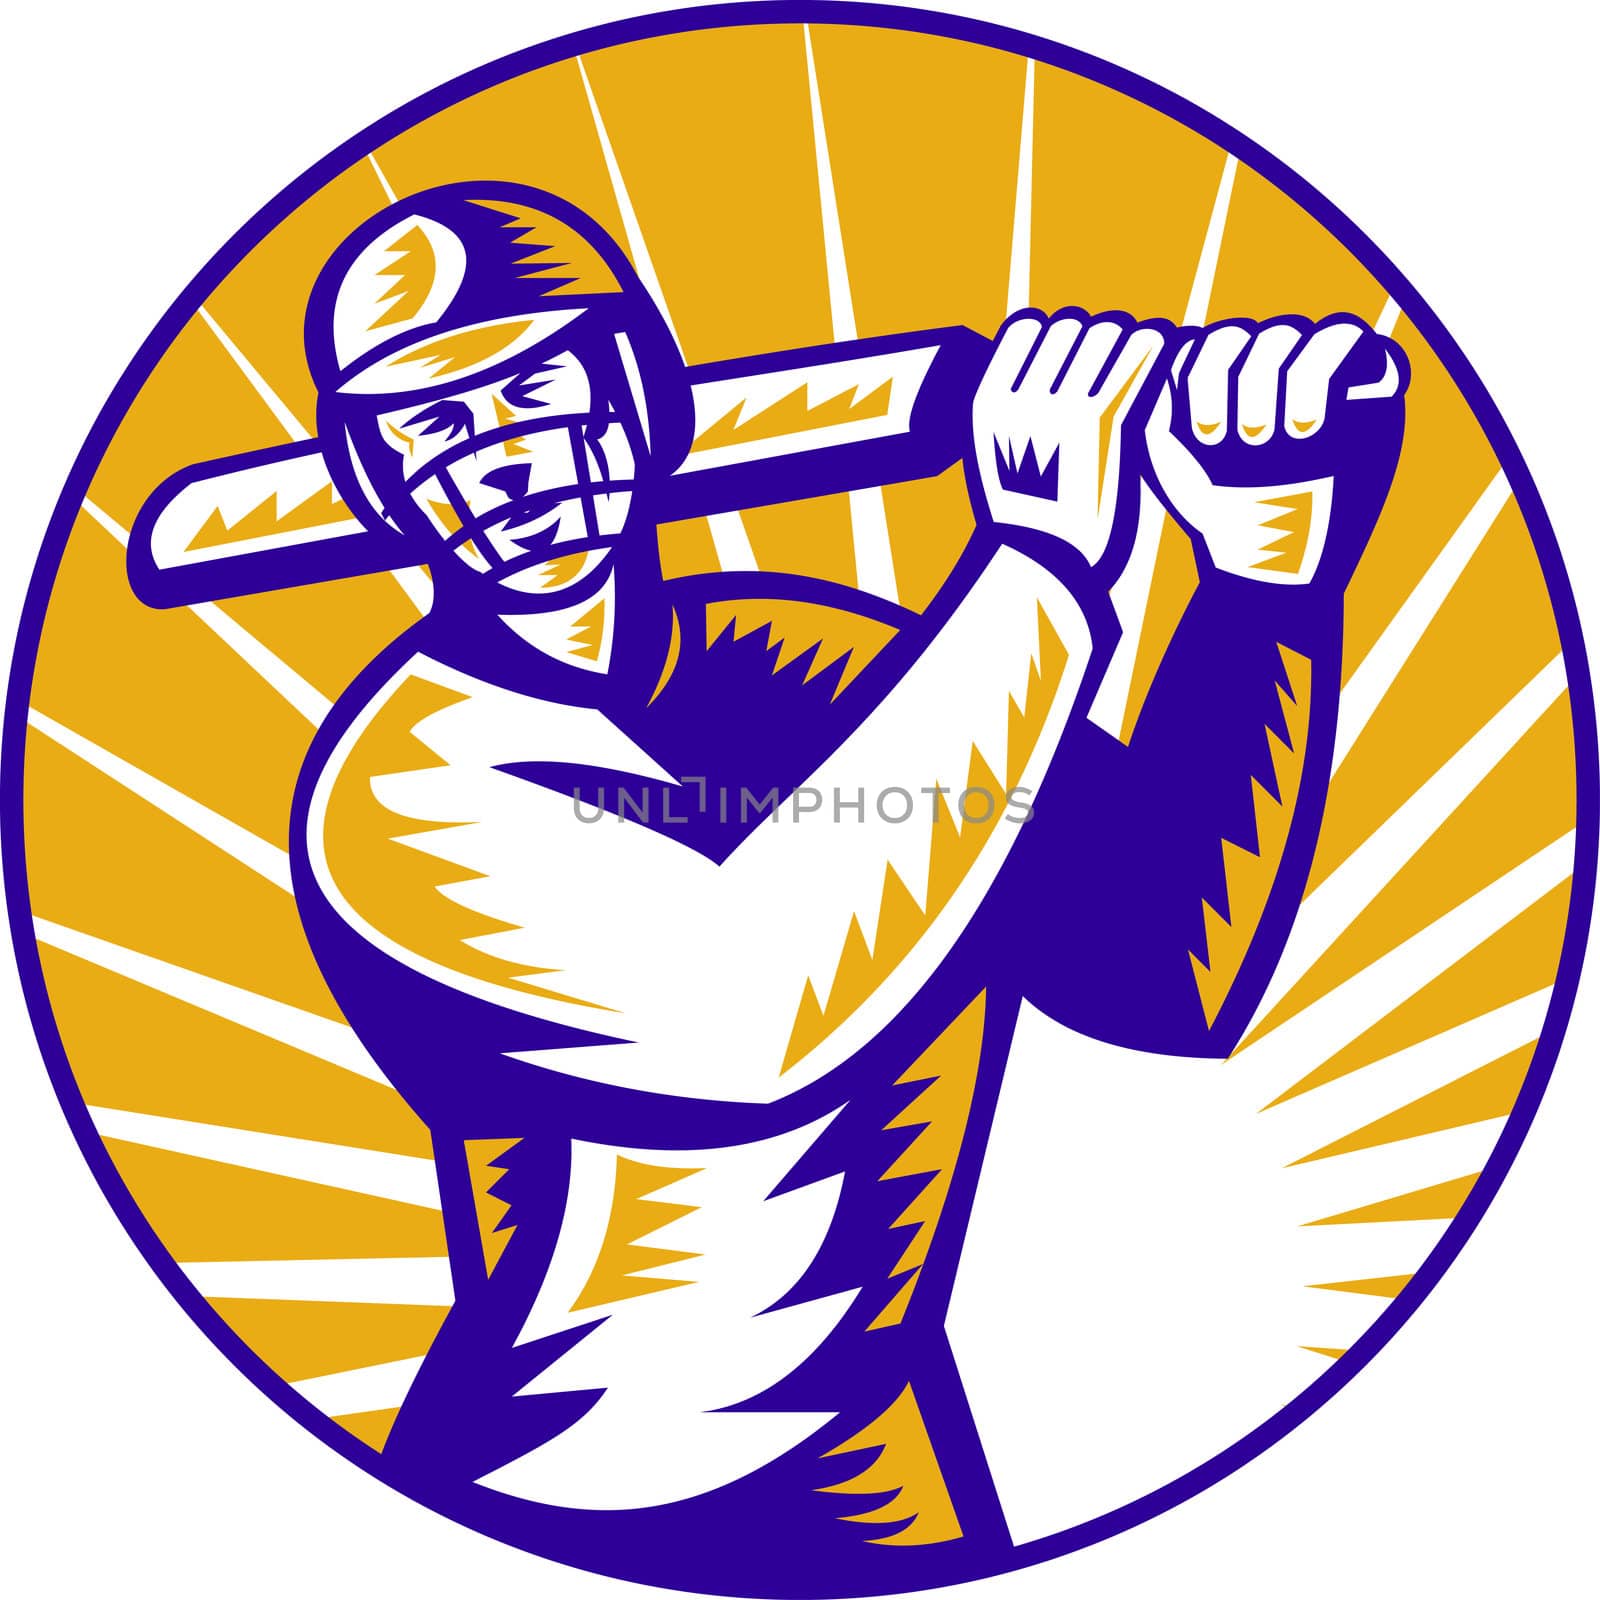 illustration of a cricket batsman batting front view  done in retro woodcut style set inside circle